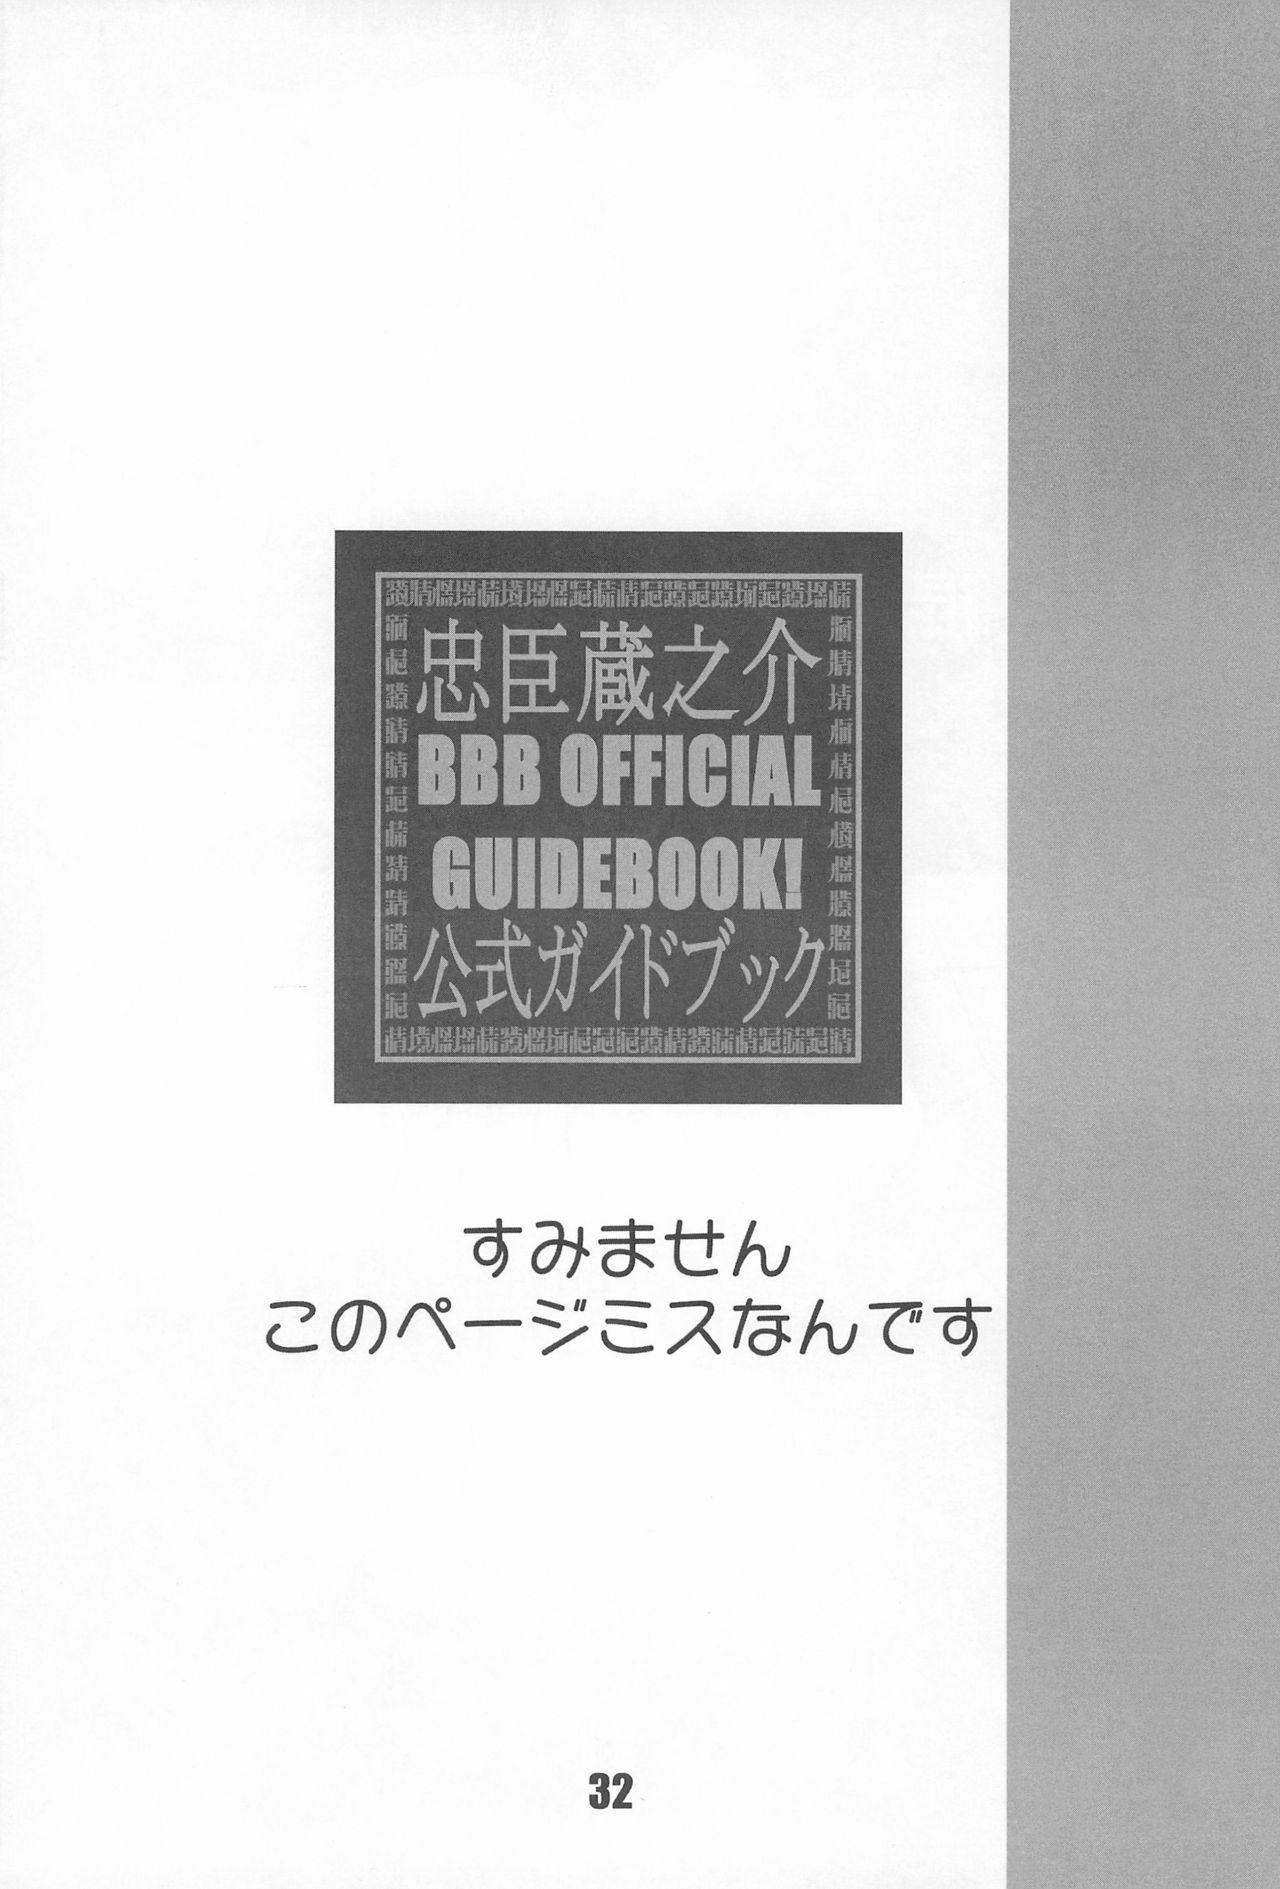 BBB OFFICIAL GUIDE BOOK 31